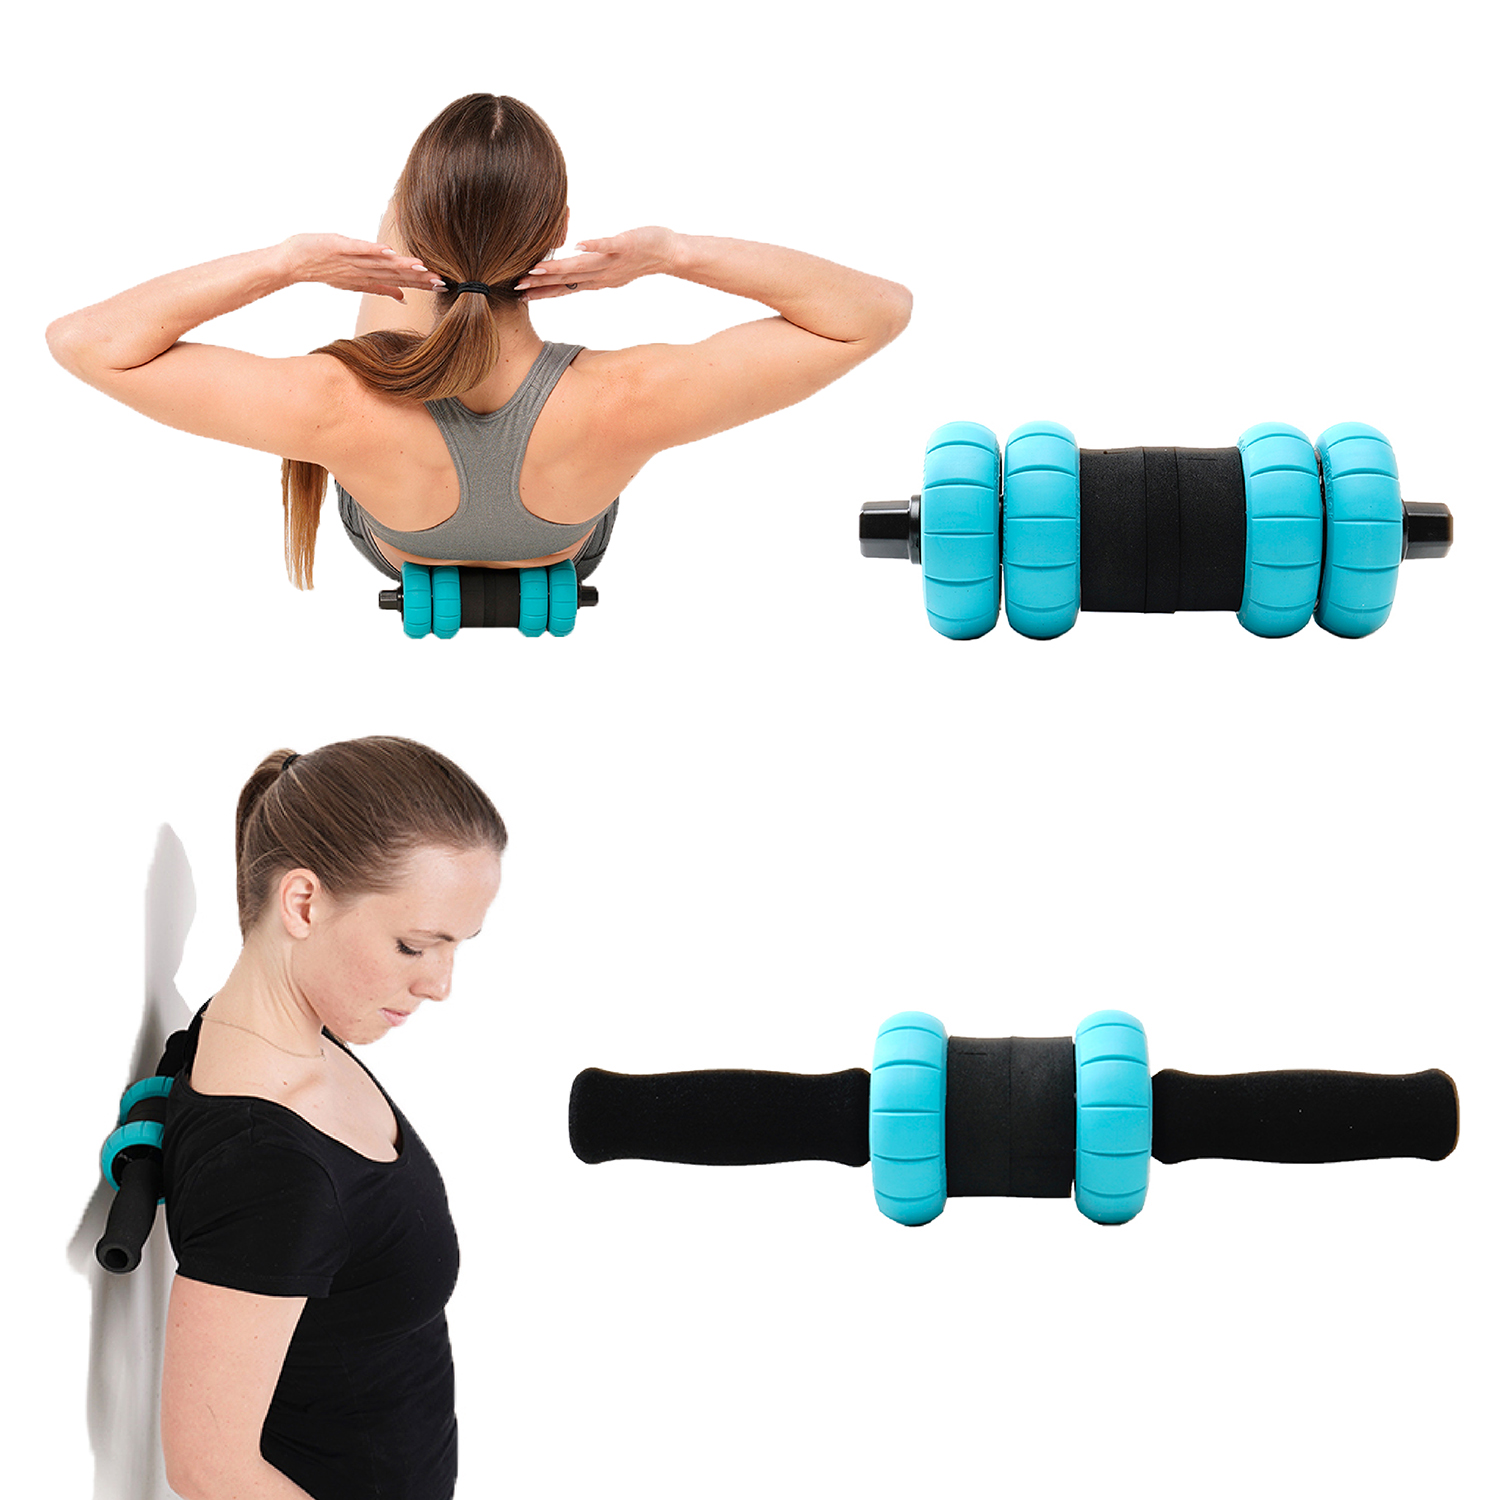 Back Massage Tools Rtpro Back Extensor Kit Therapy For Your Back